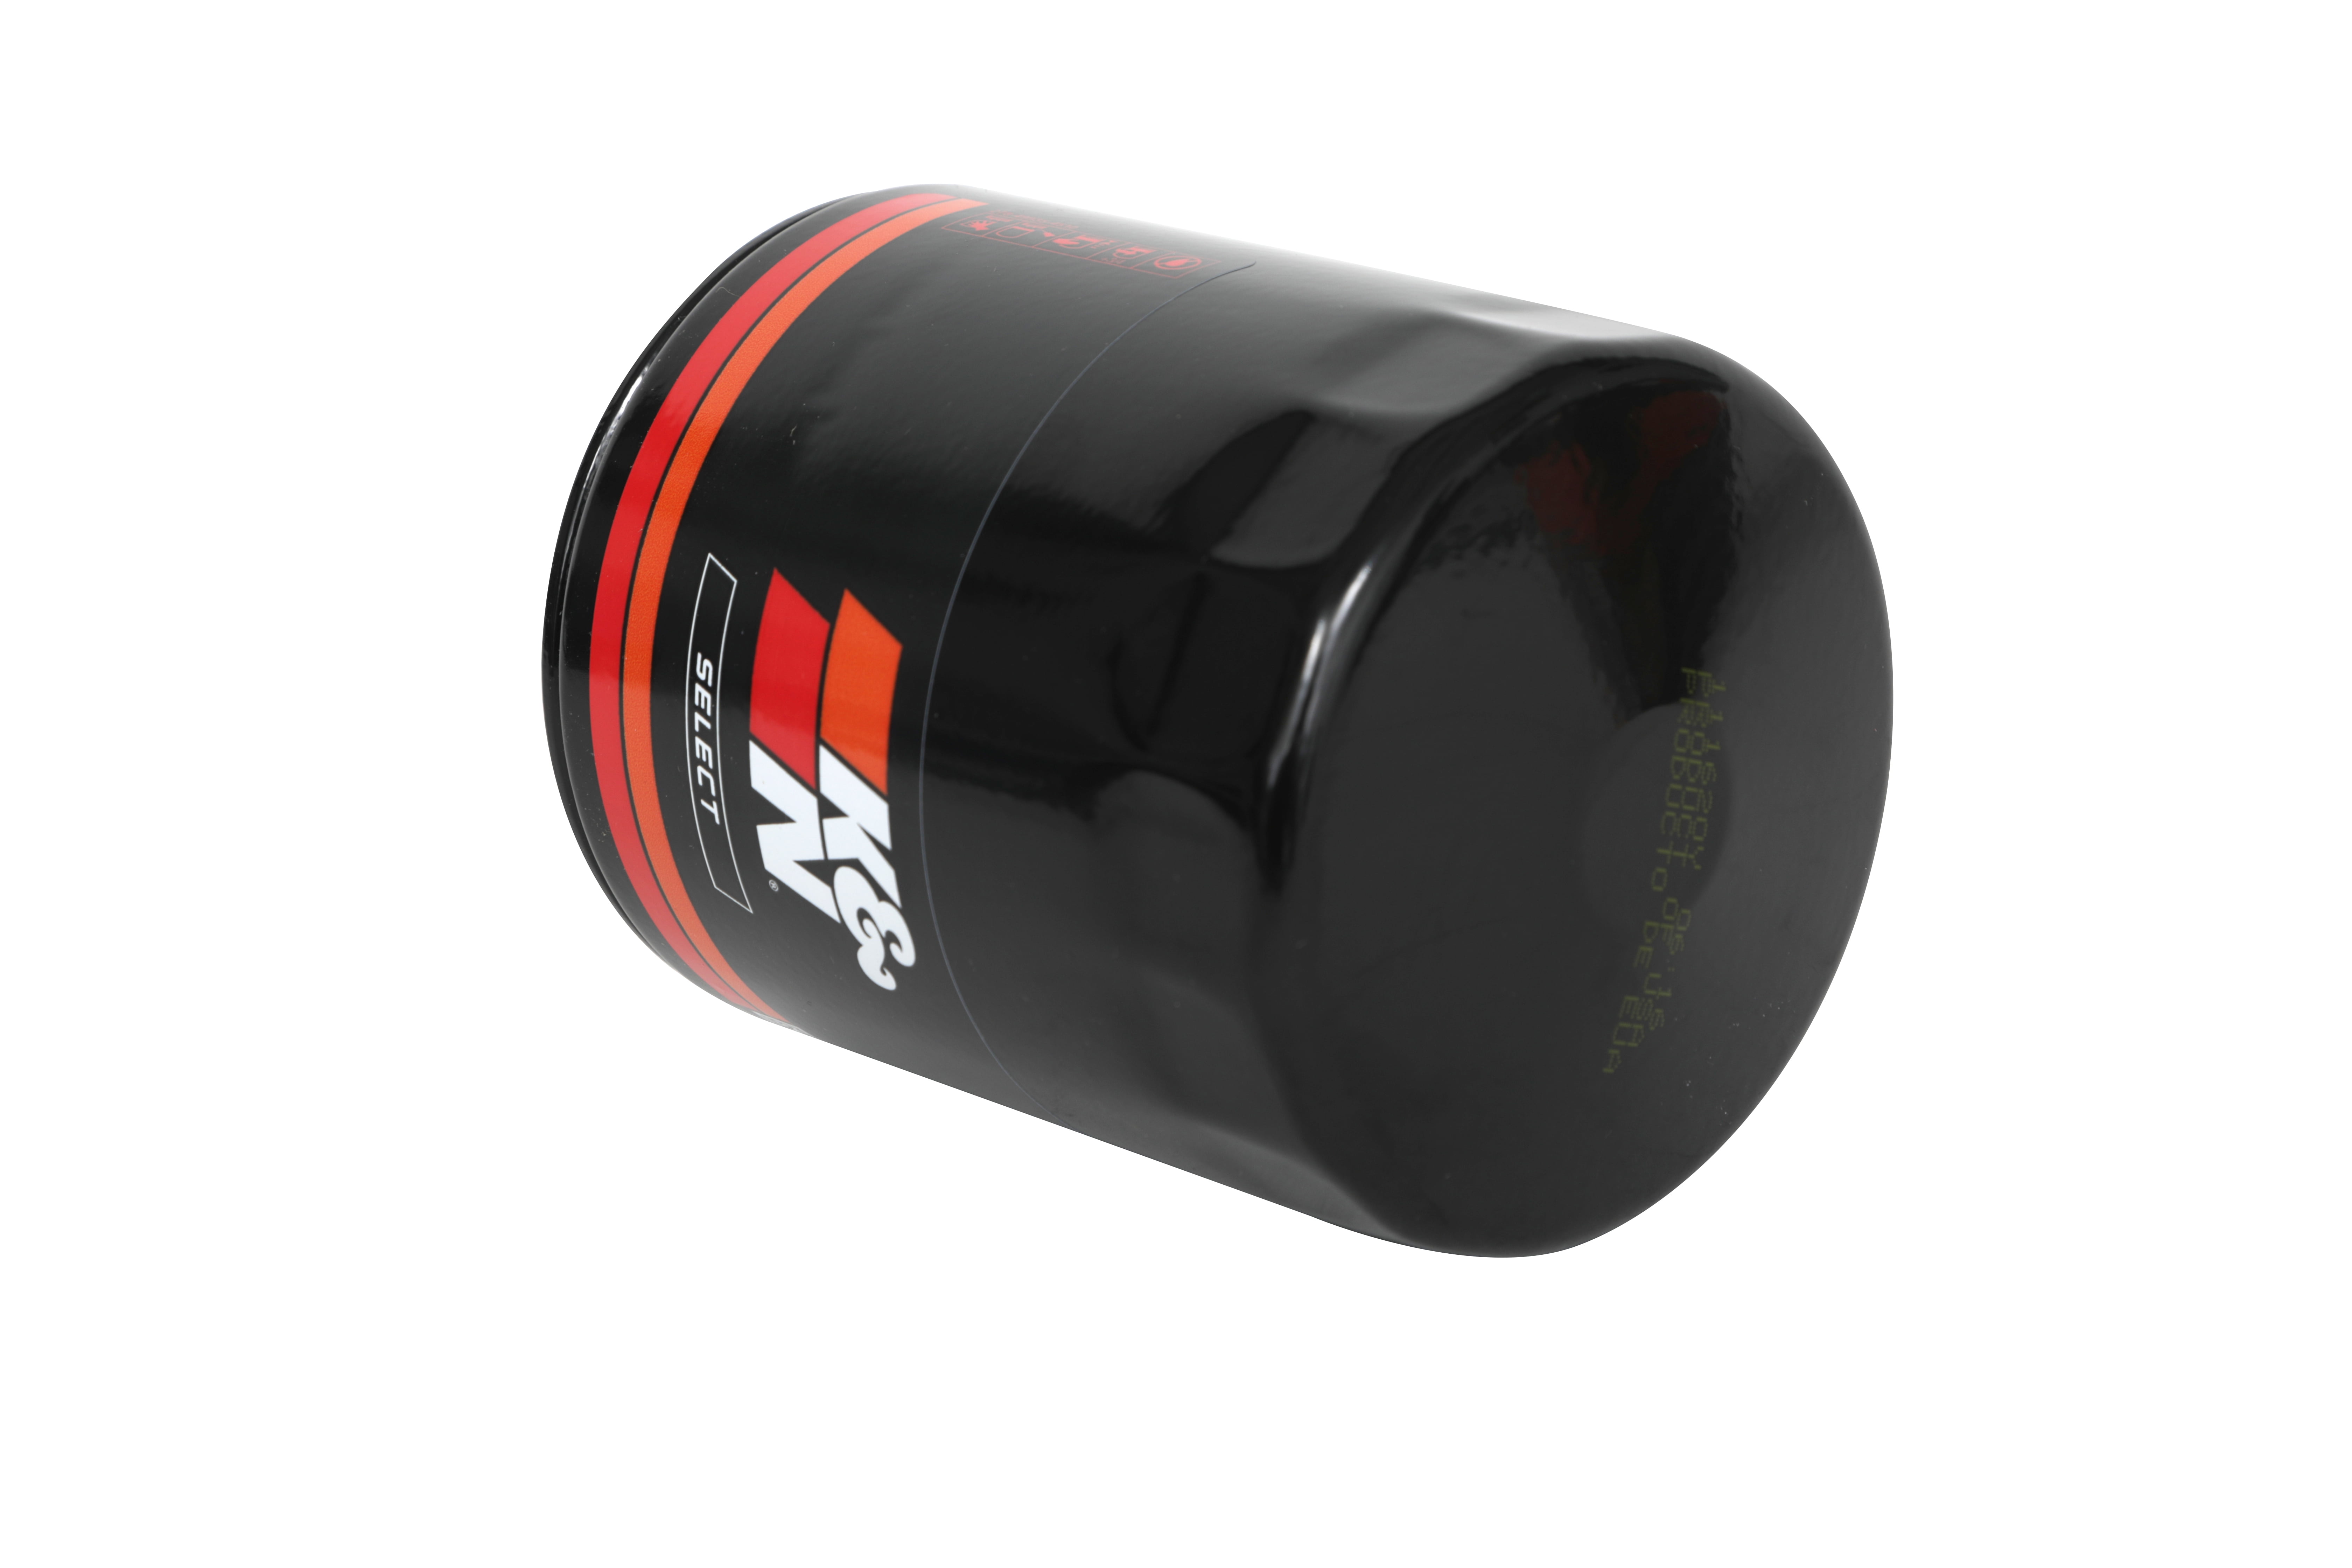 K&N Select Oil Filter: Designed to Protect Your Engine, So-3001